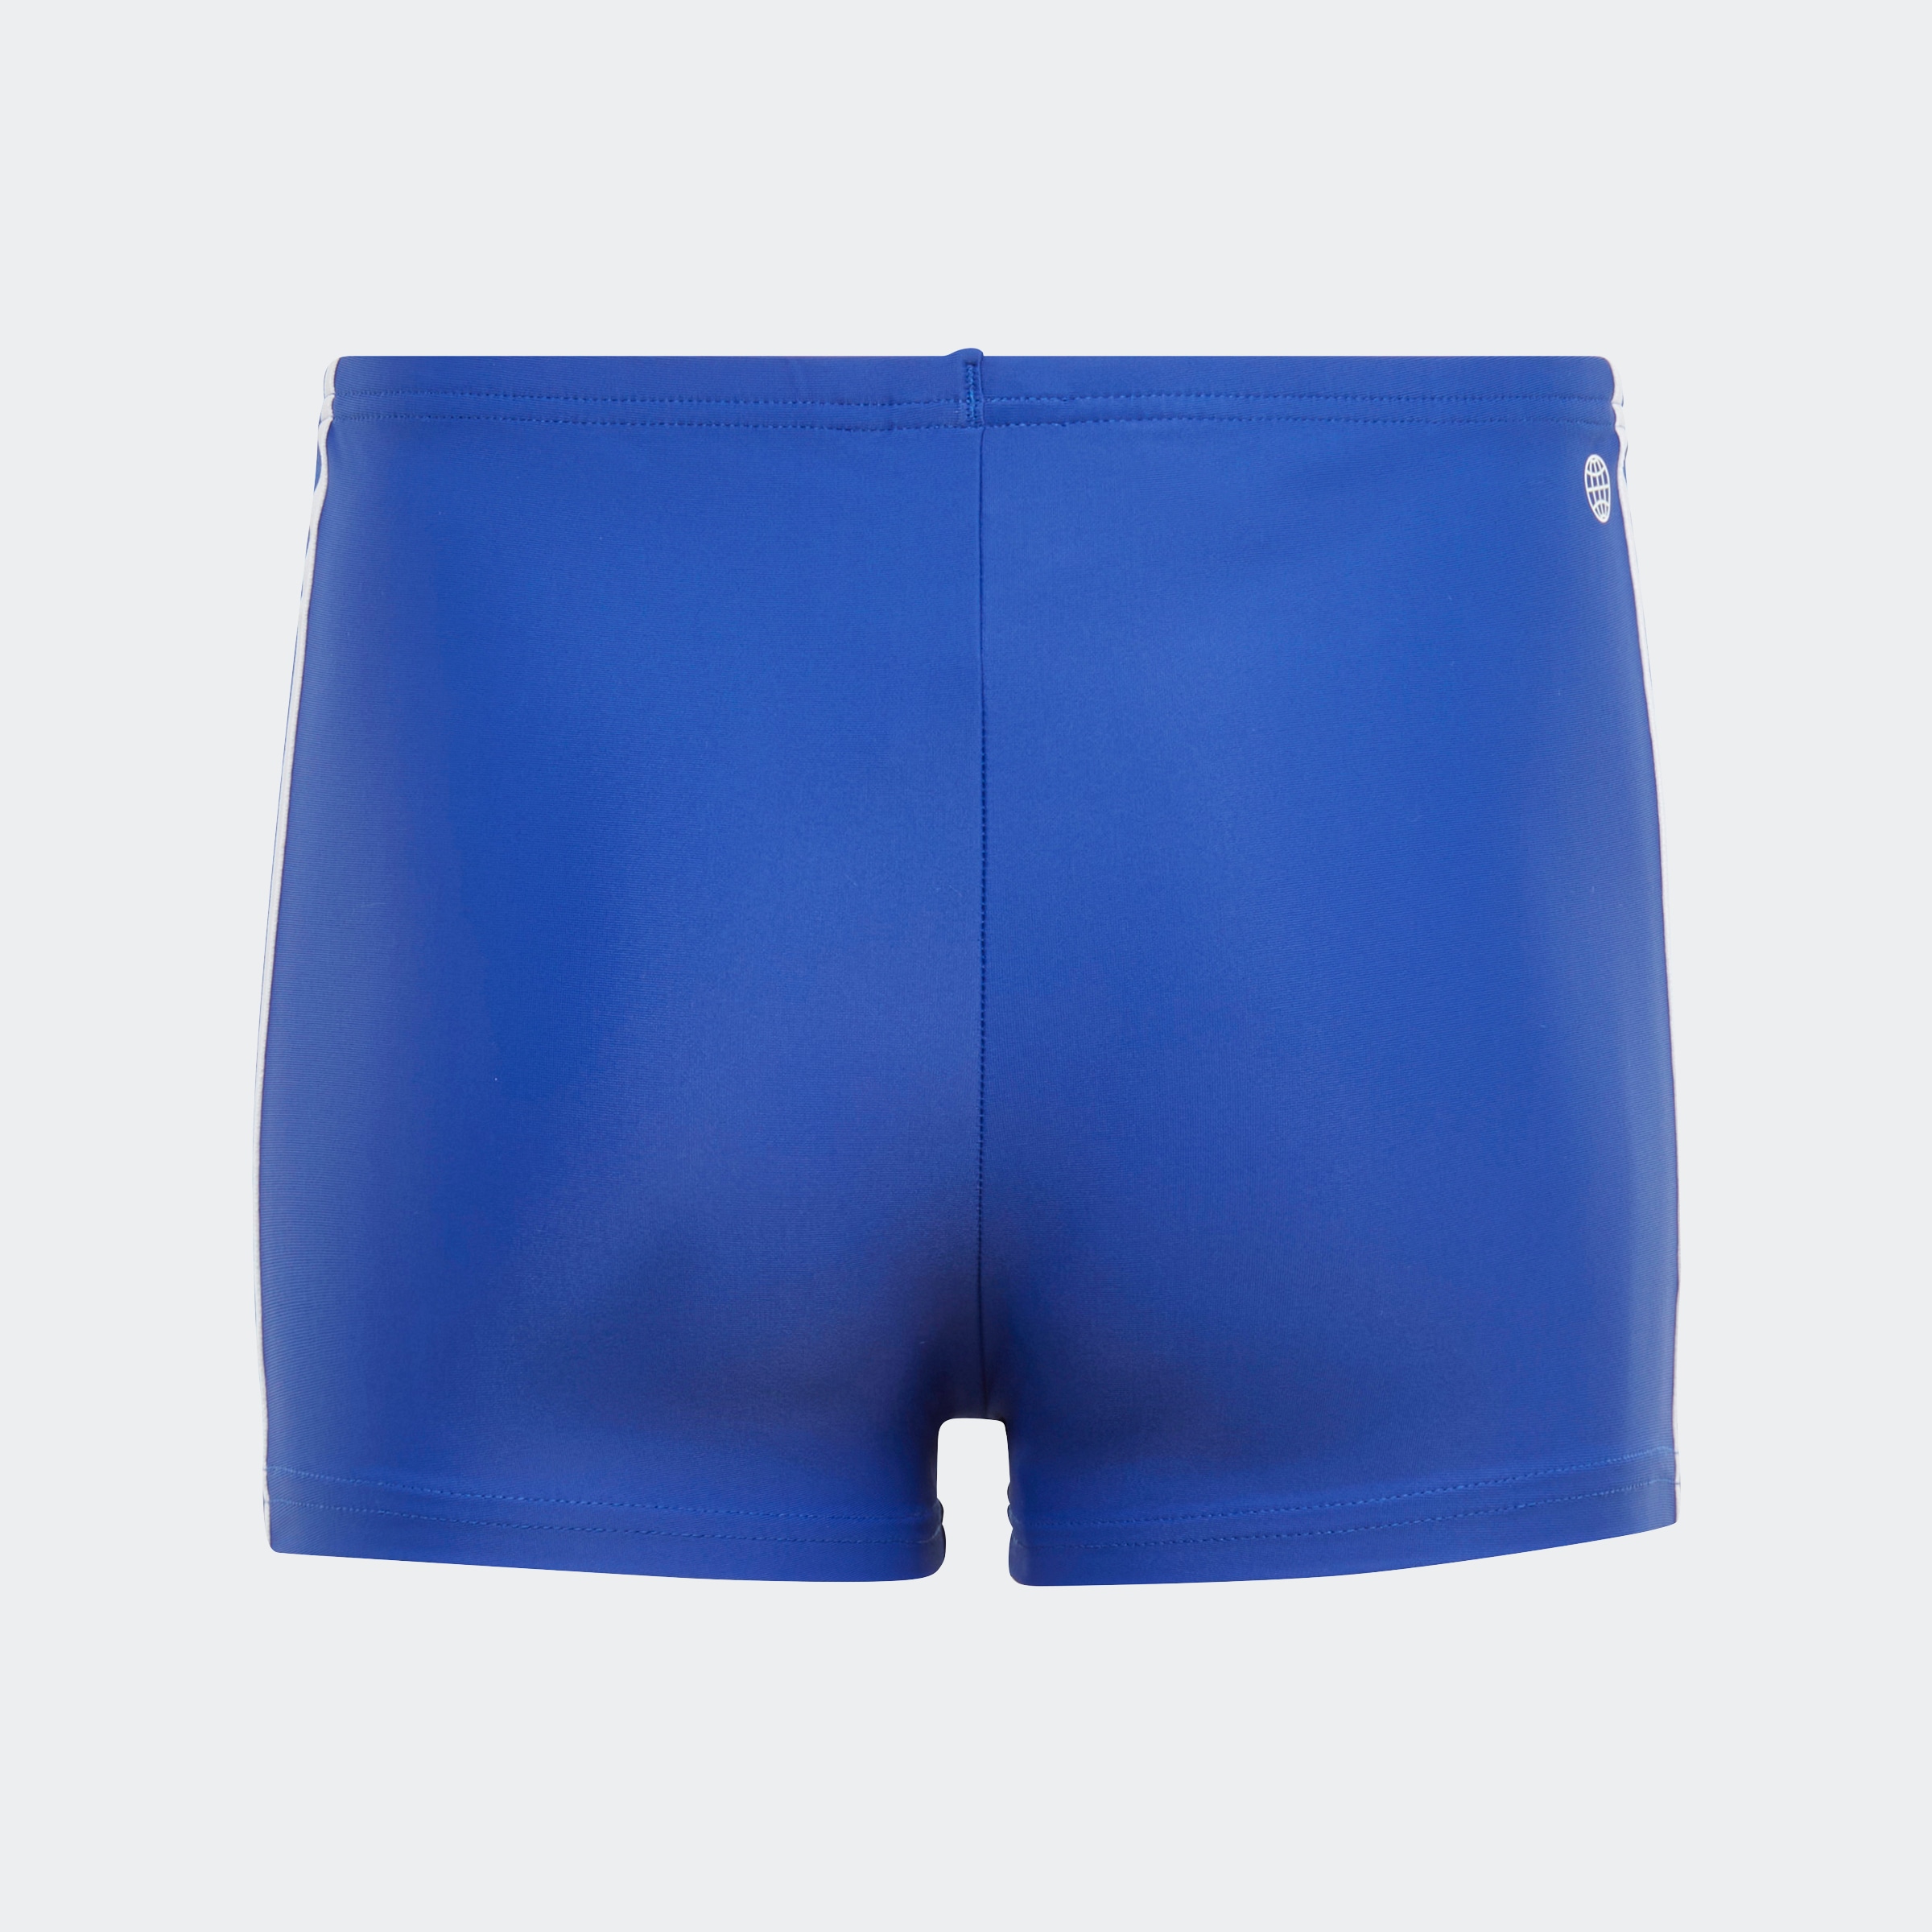 adidas BOXER«, St.) (1 bei Badehose »3S Performance